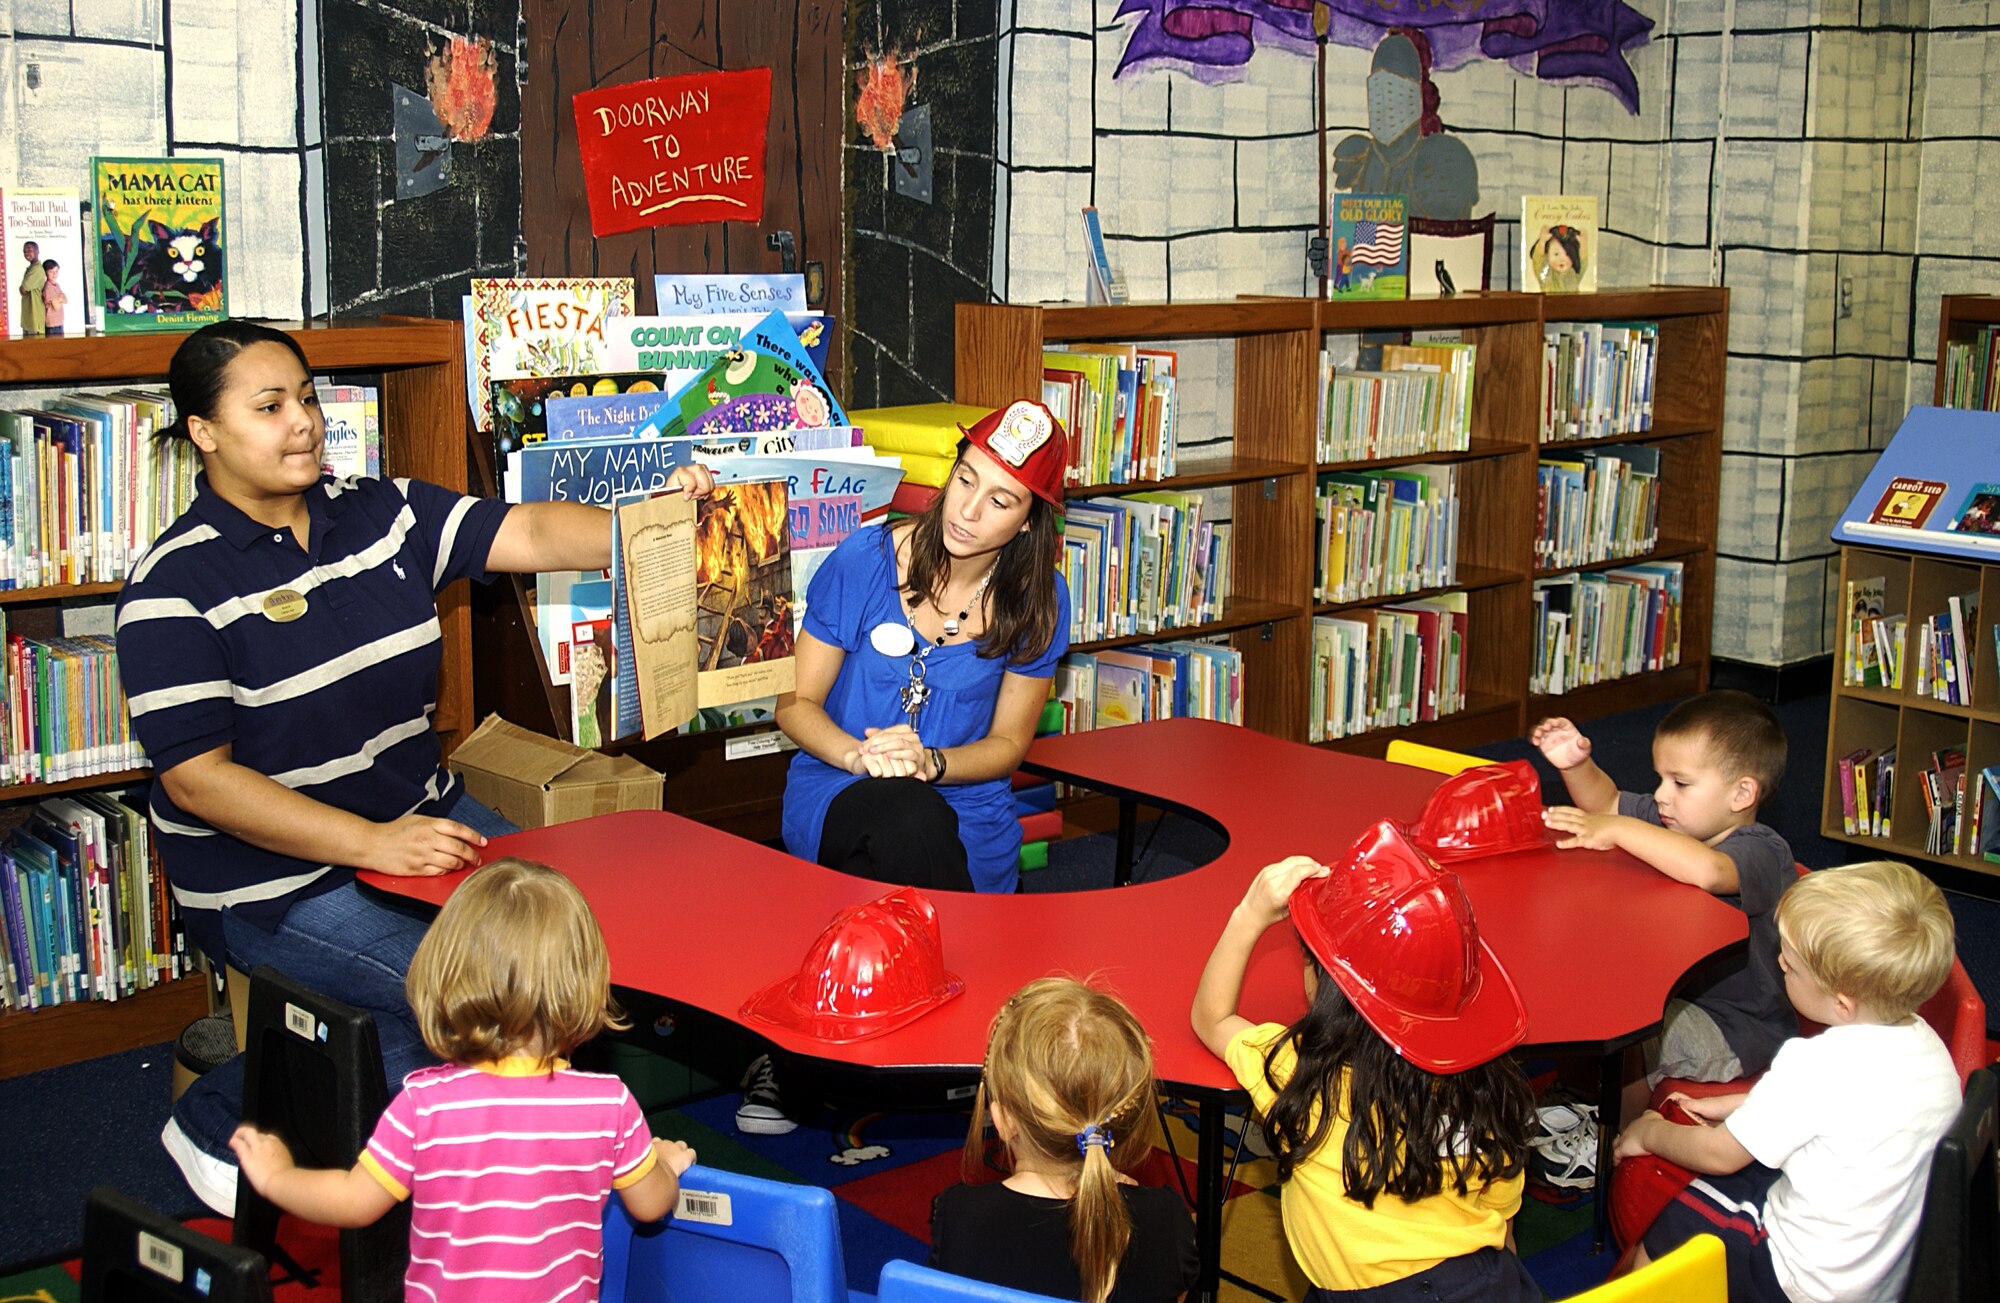 ANDERSEN AIR FORCE BASE, Guam - Christina Wray and Alicia Jackson, both librarian aides for the 36th Force Support Squadron, read children the book "New York's Finest" during Story Time at the Andersen Library Oct. 1. (U.S. Air Force photo by Airman 1st Class Carissa Wolff)                                 